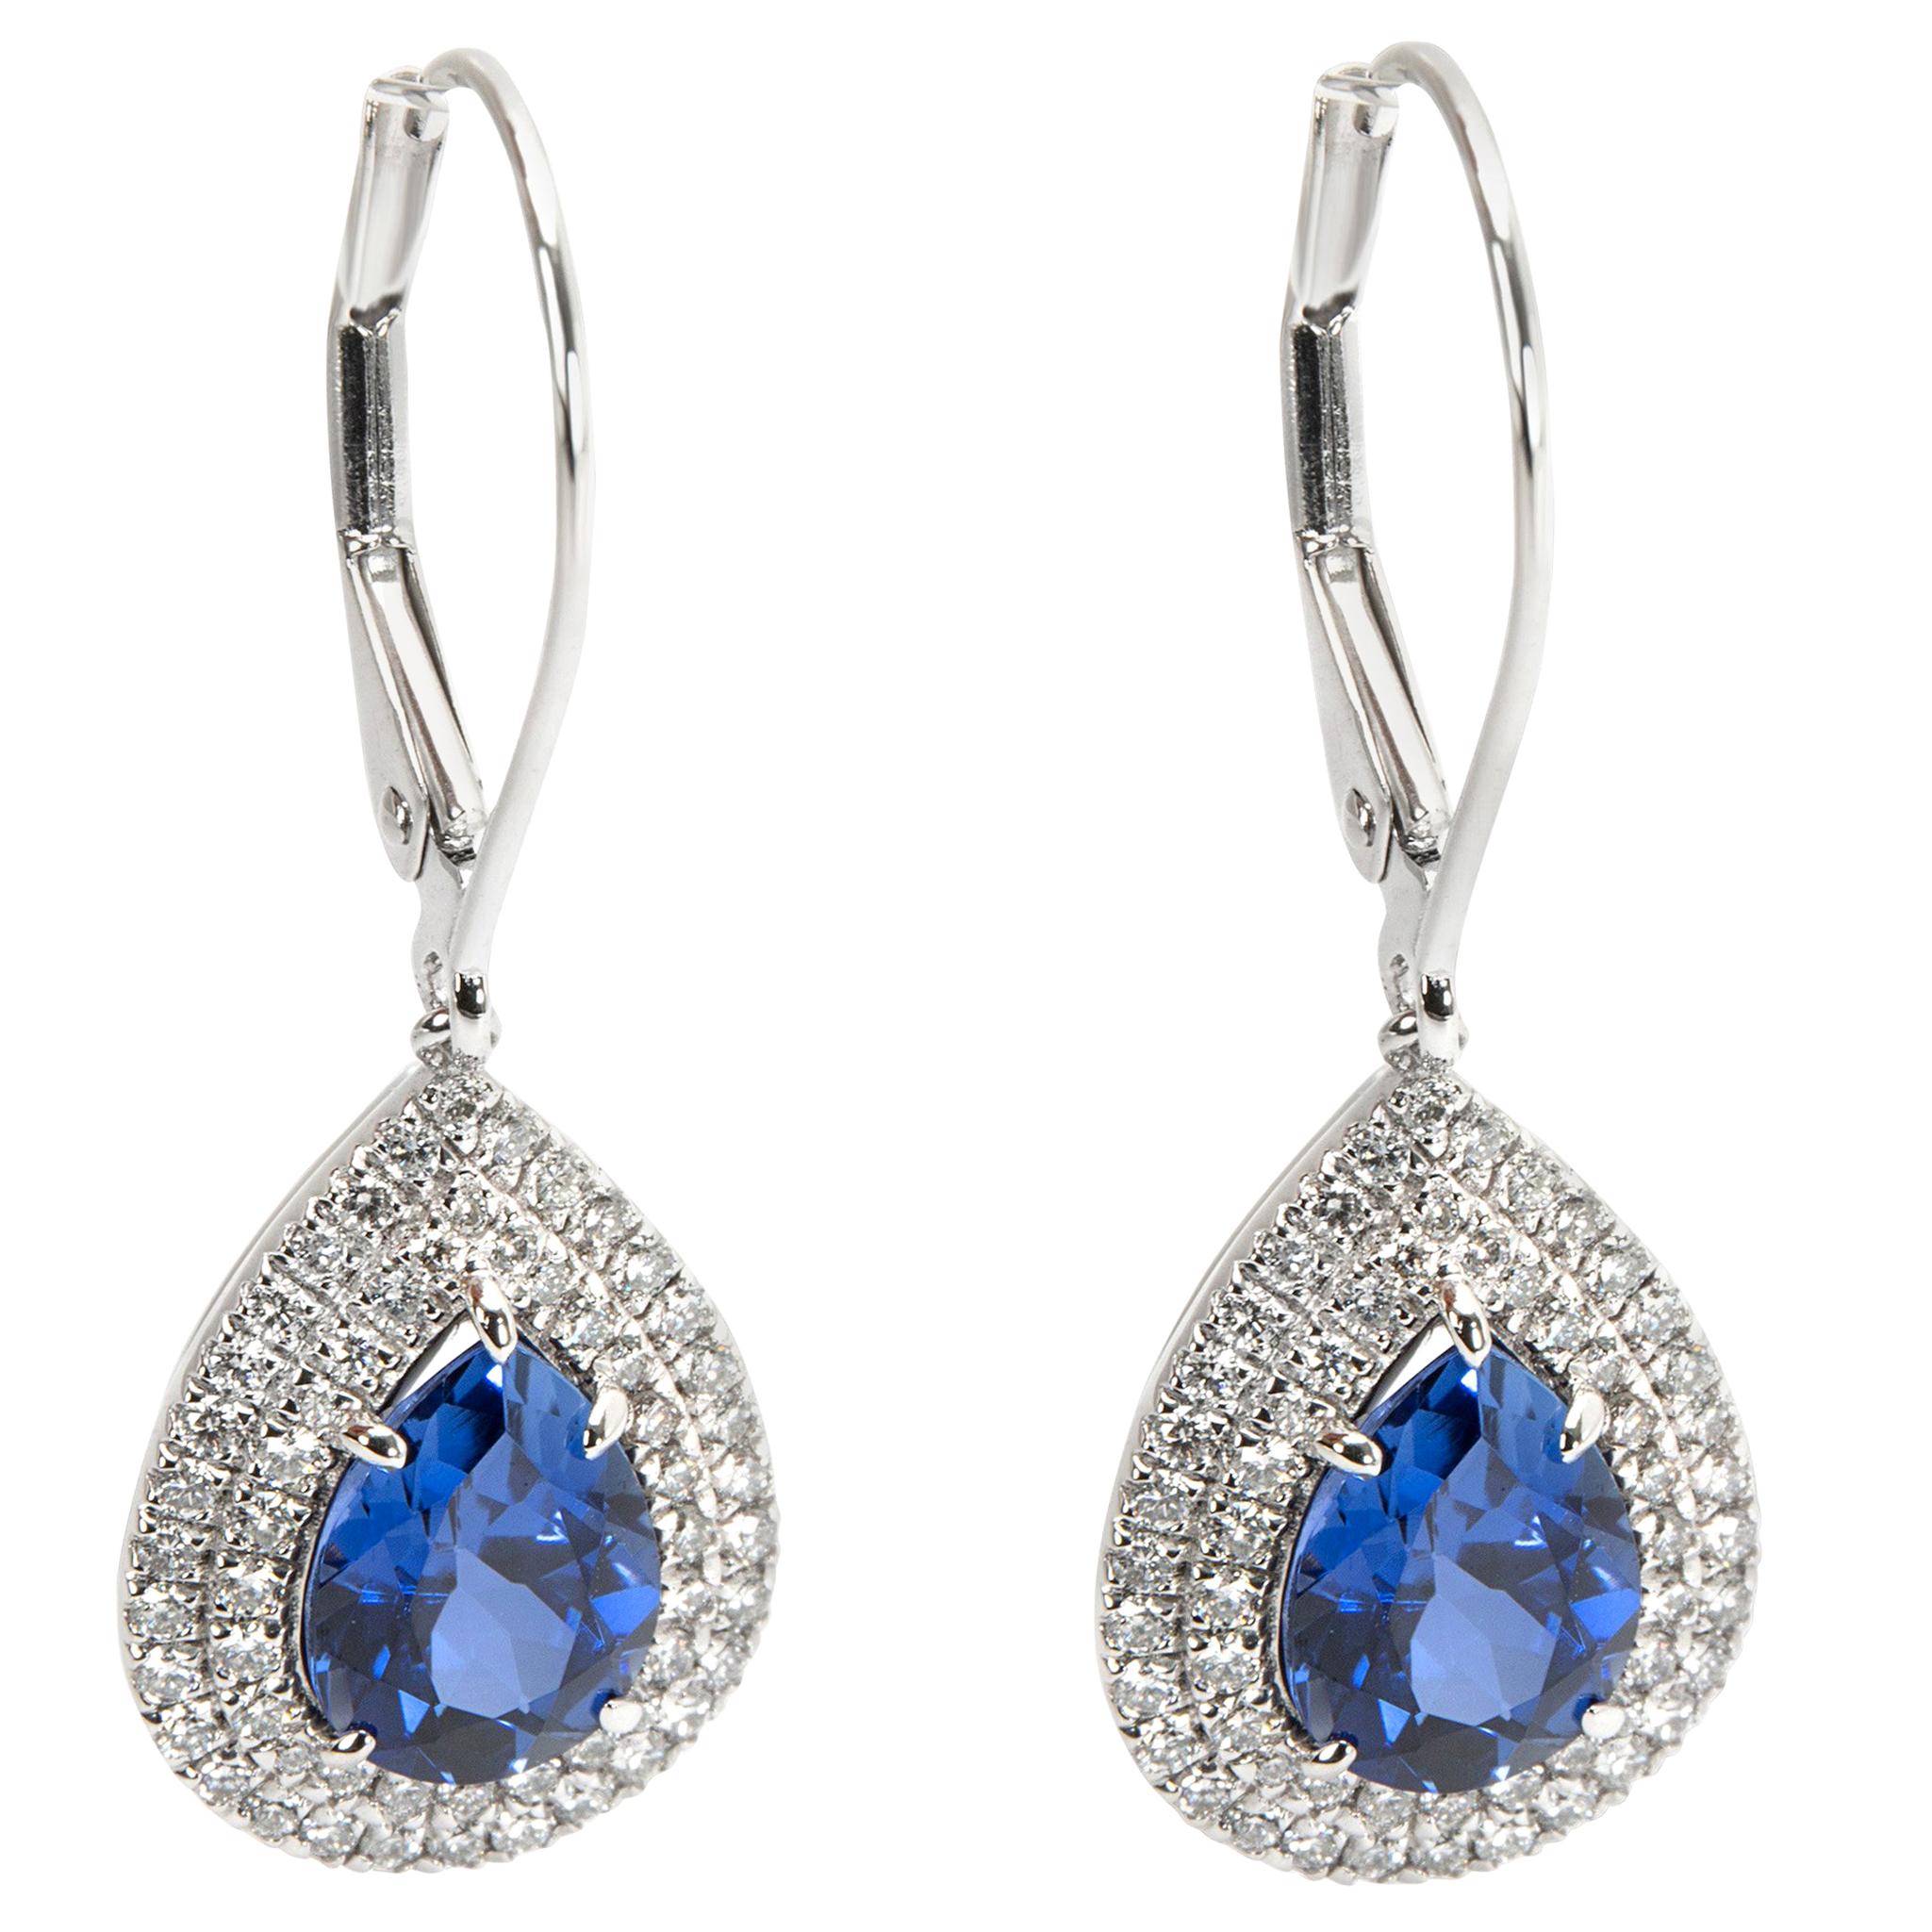 Tiffany and Co. Soleste Tanzanite and Diamond Earrings in Platinum Blue ...